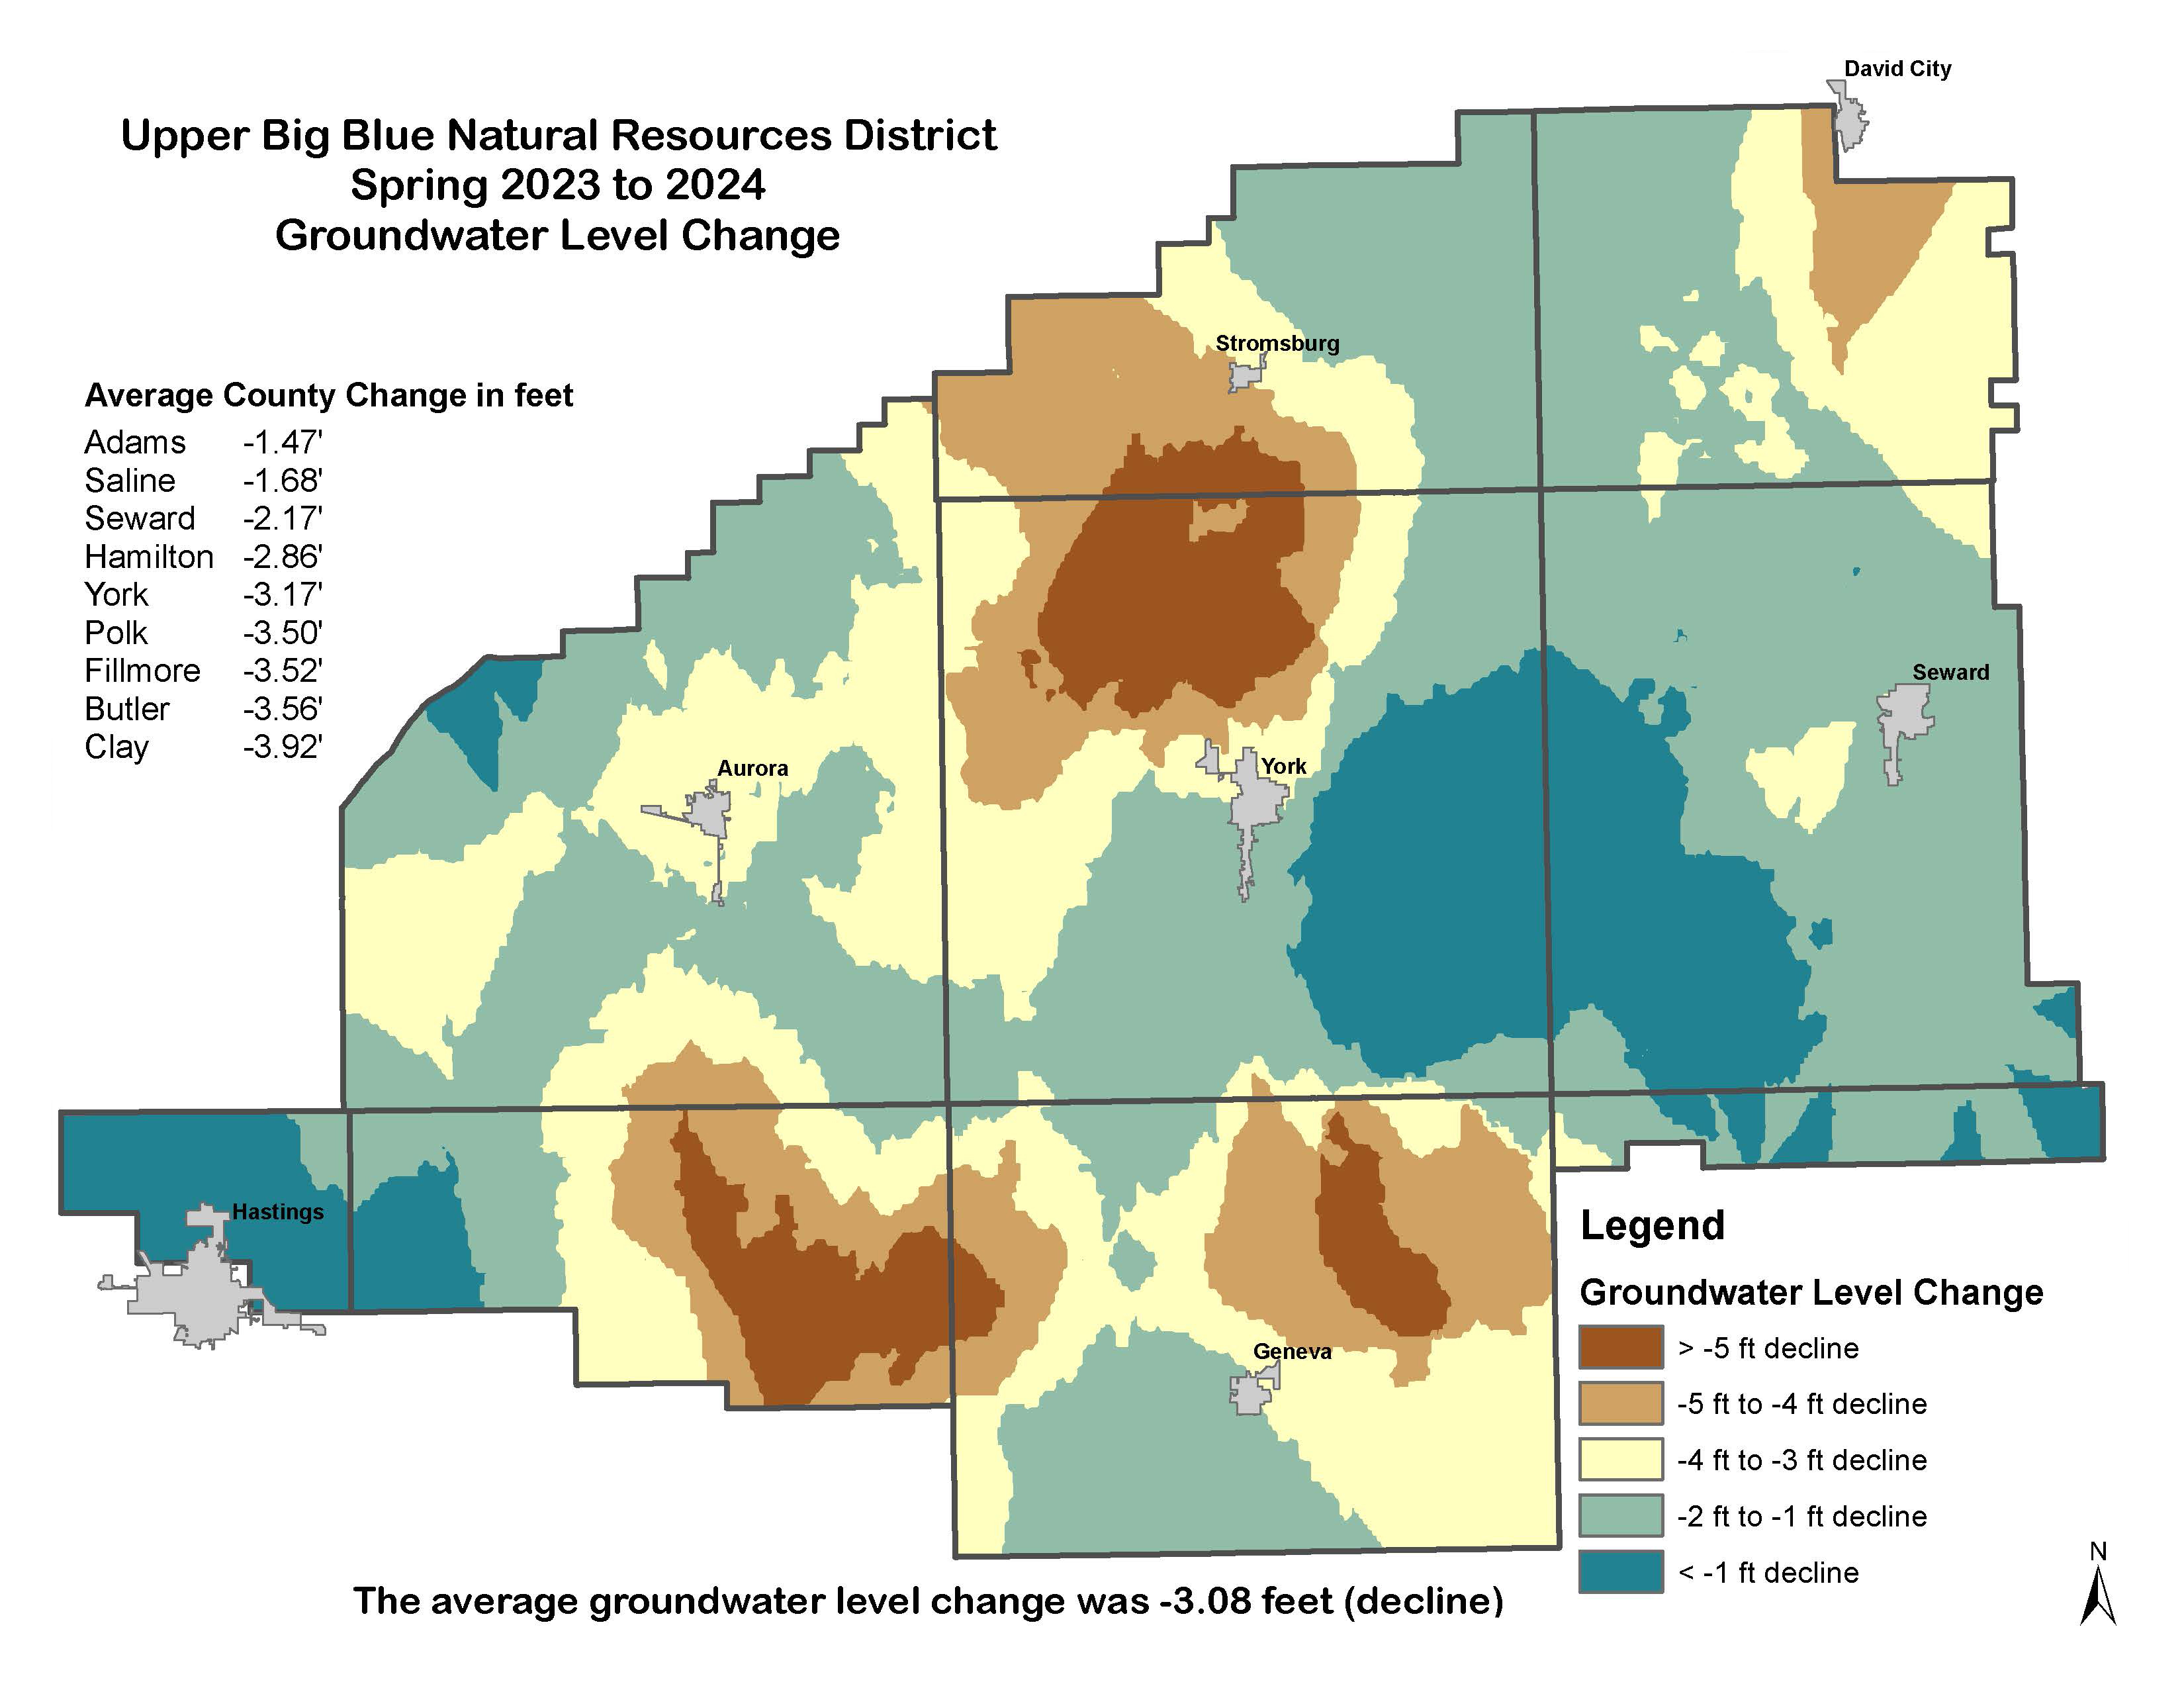 2023-2024 groundwater level change map